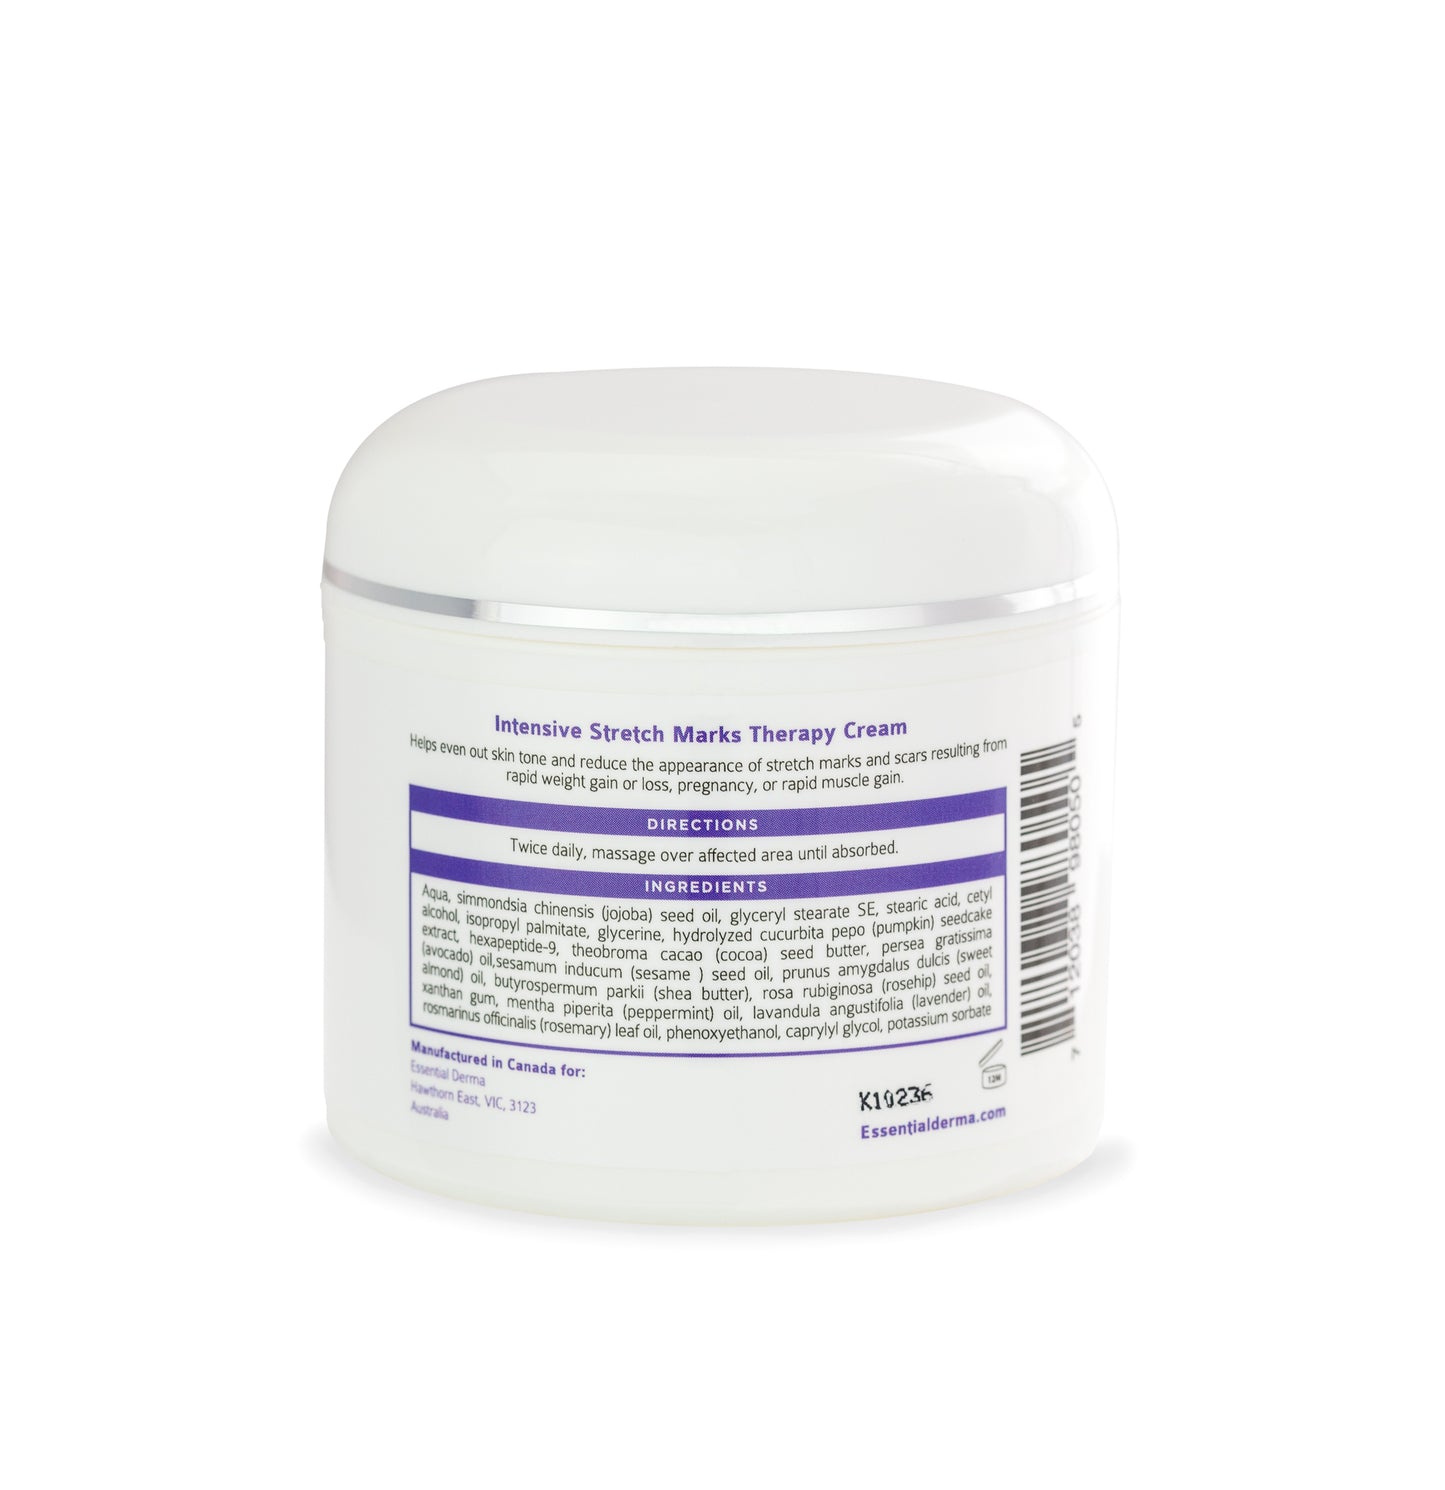 Intensive Stretch Marks Therapy Cream